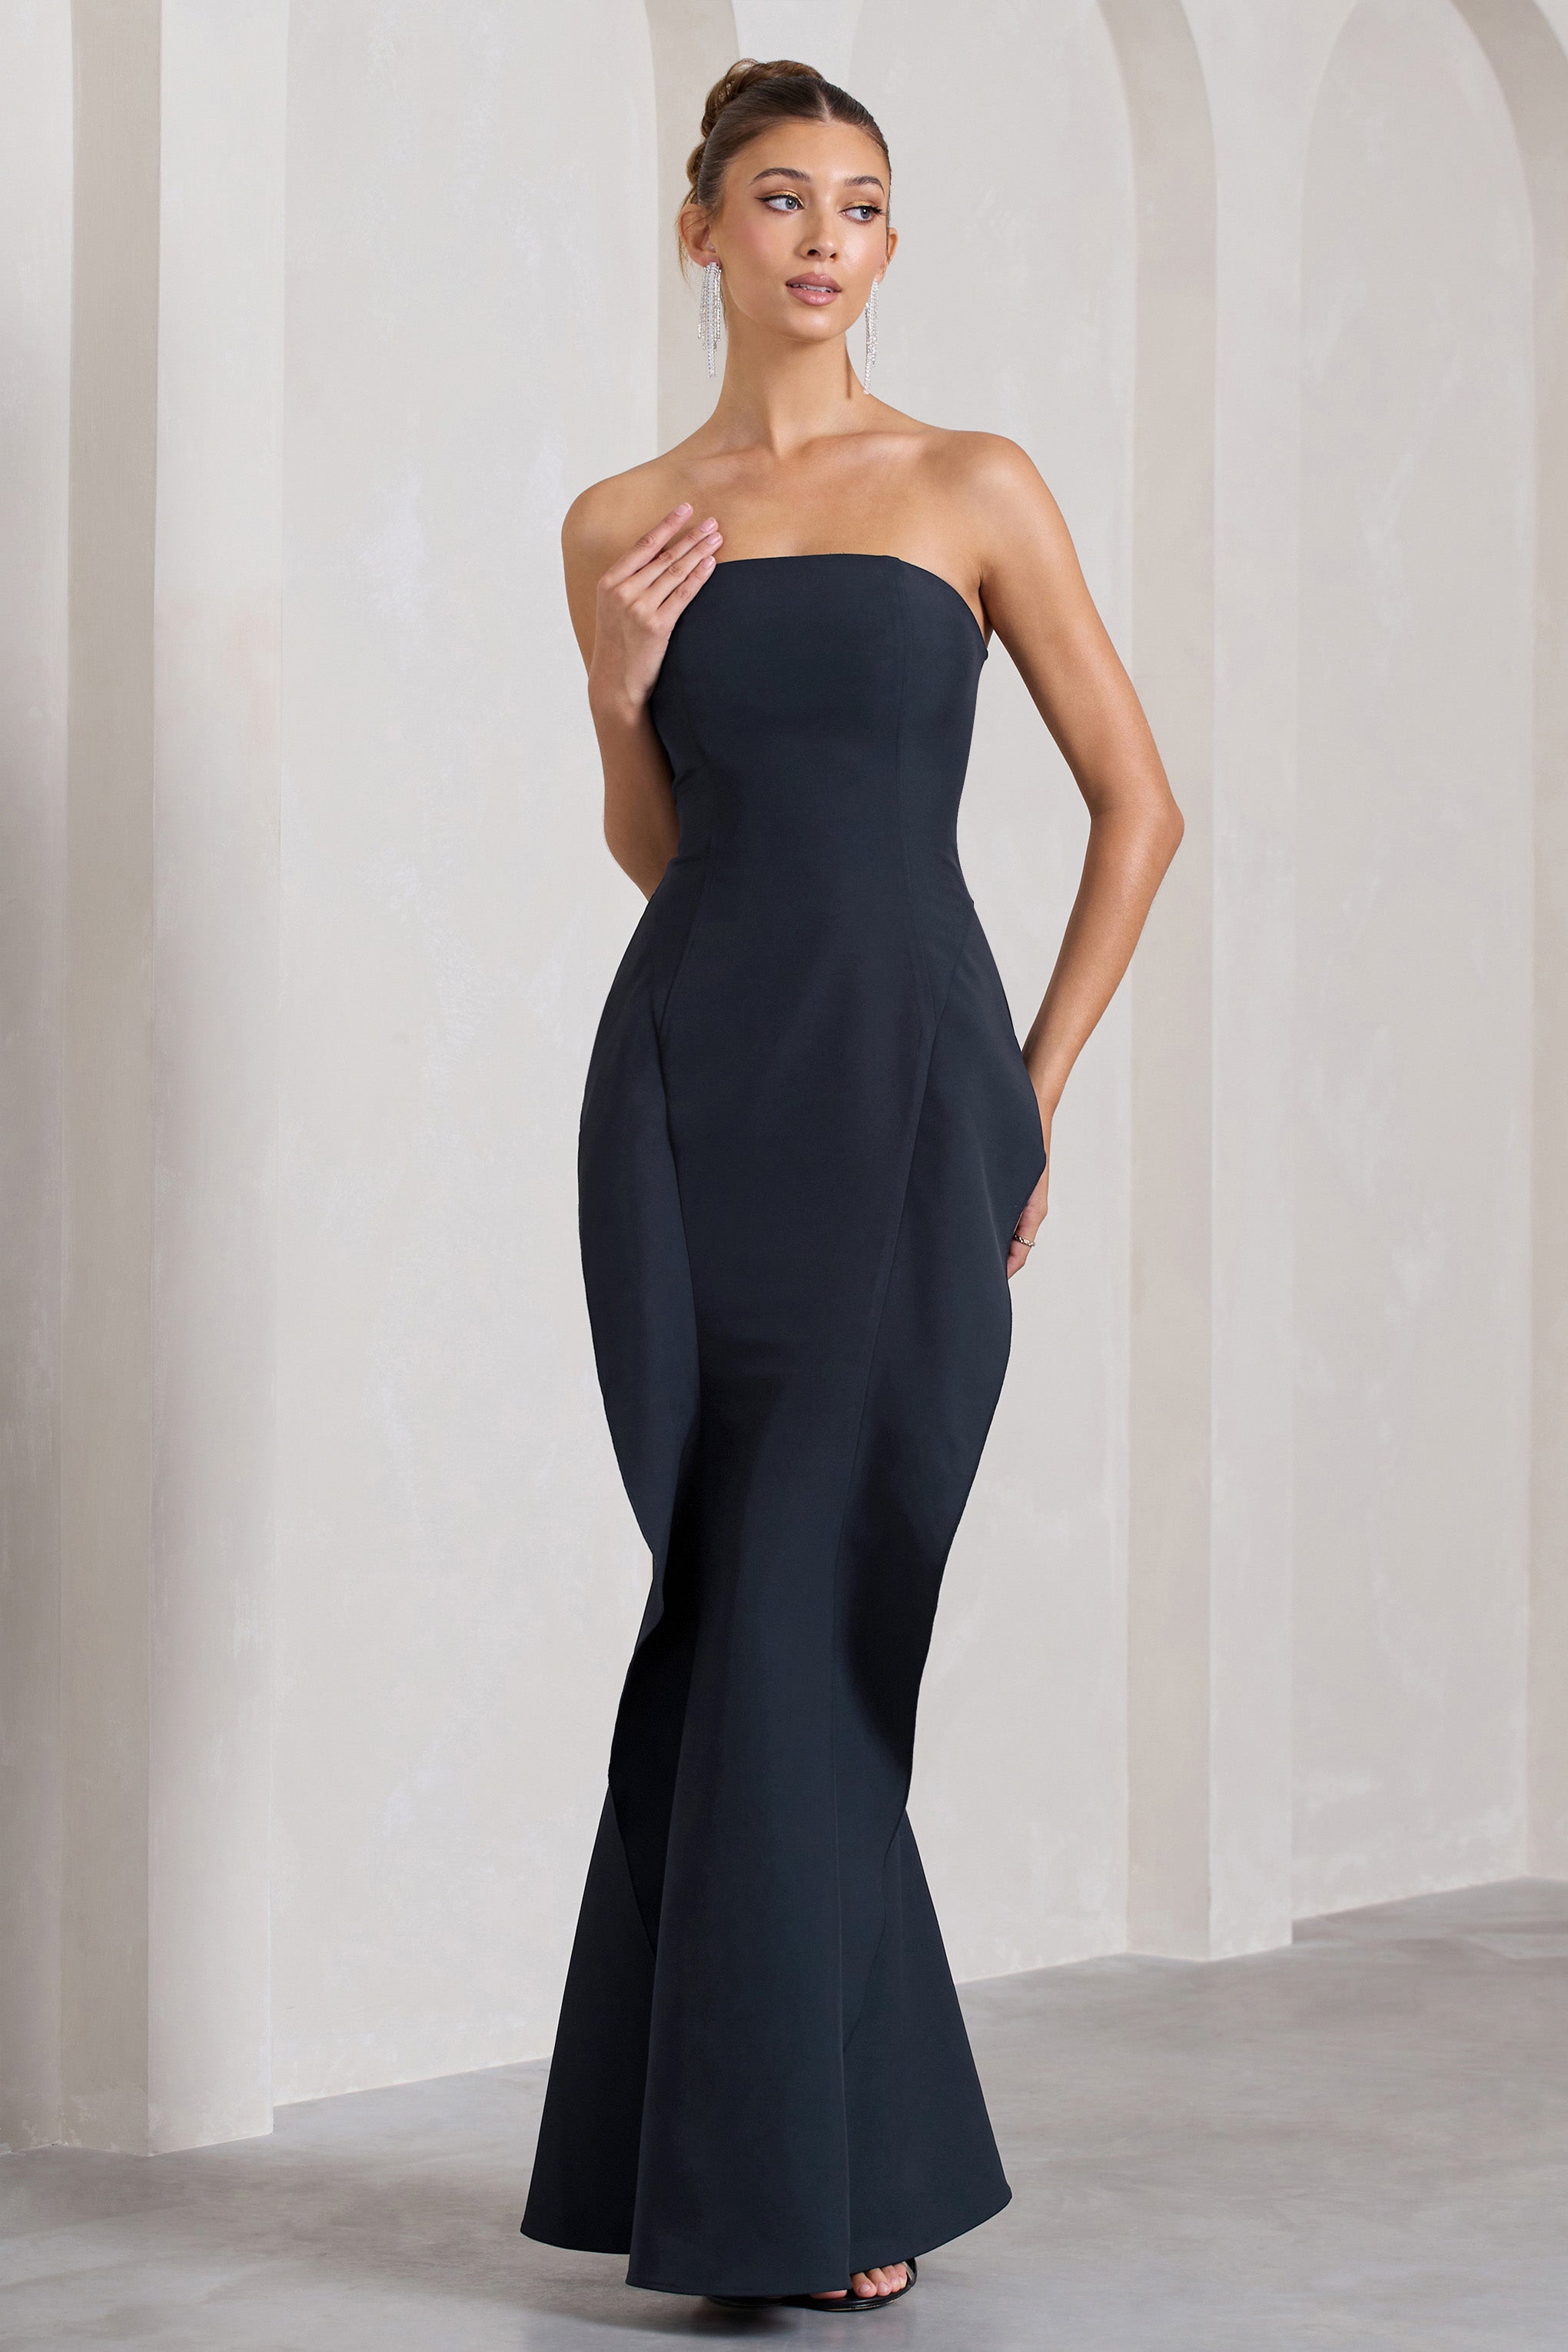 The Real Thing | Navy Strapless Draped Fishtail Maxi Dress product